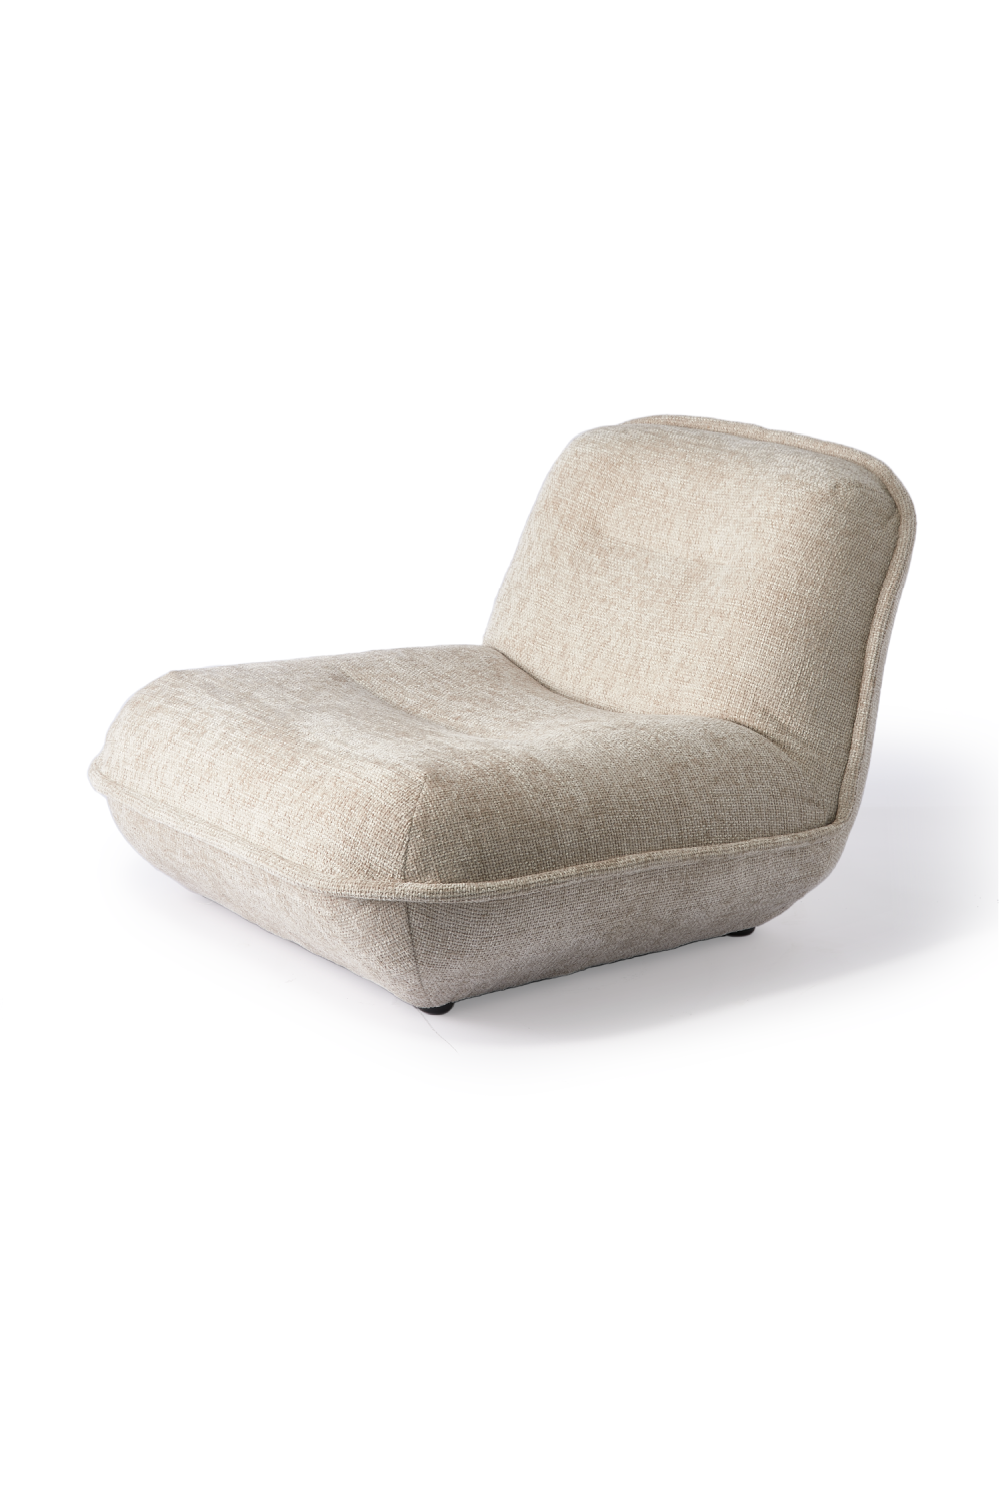 Modern Upholstered Lounge Chair | Pols Potten Puff | Oroa.com